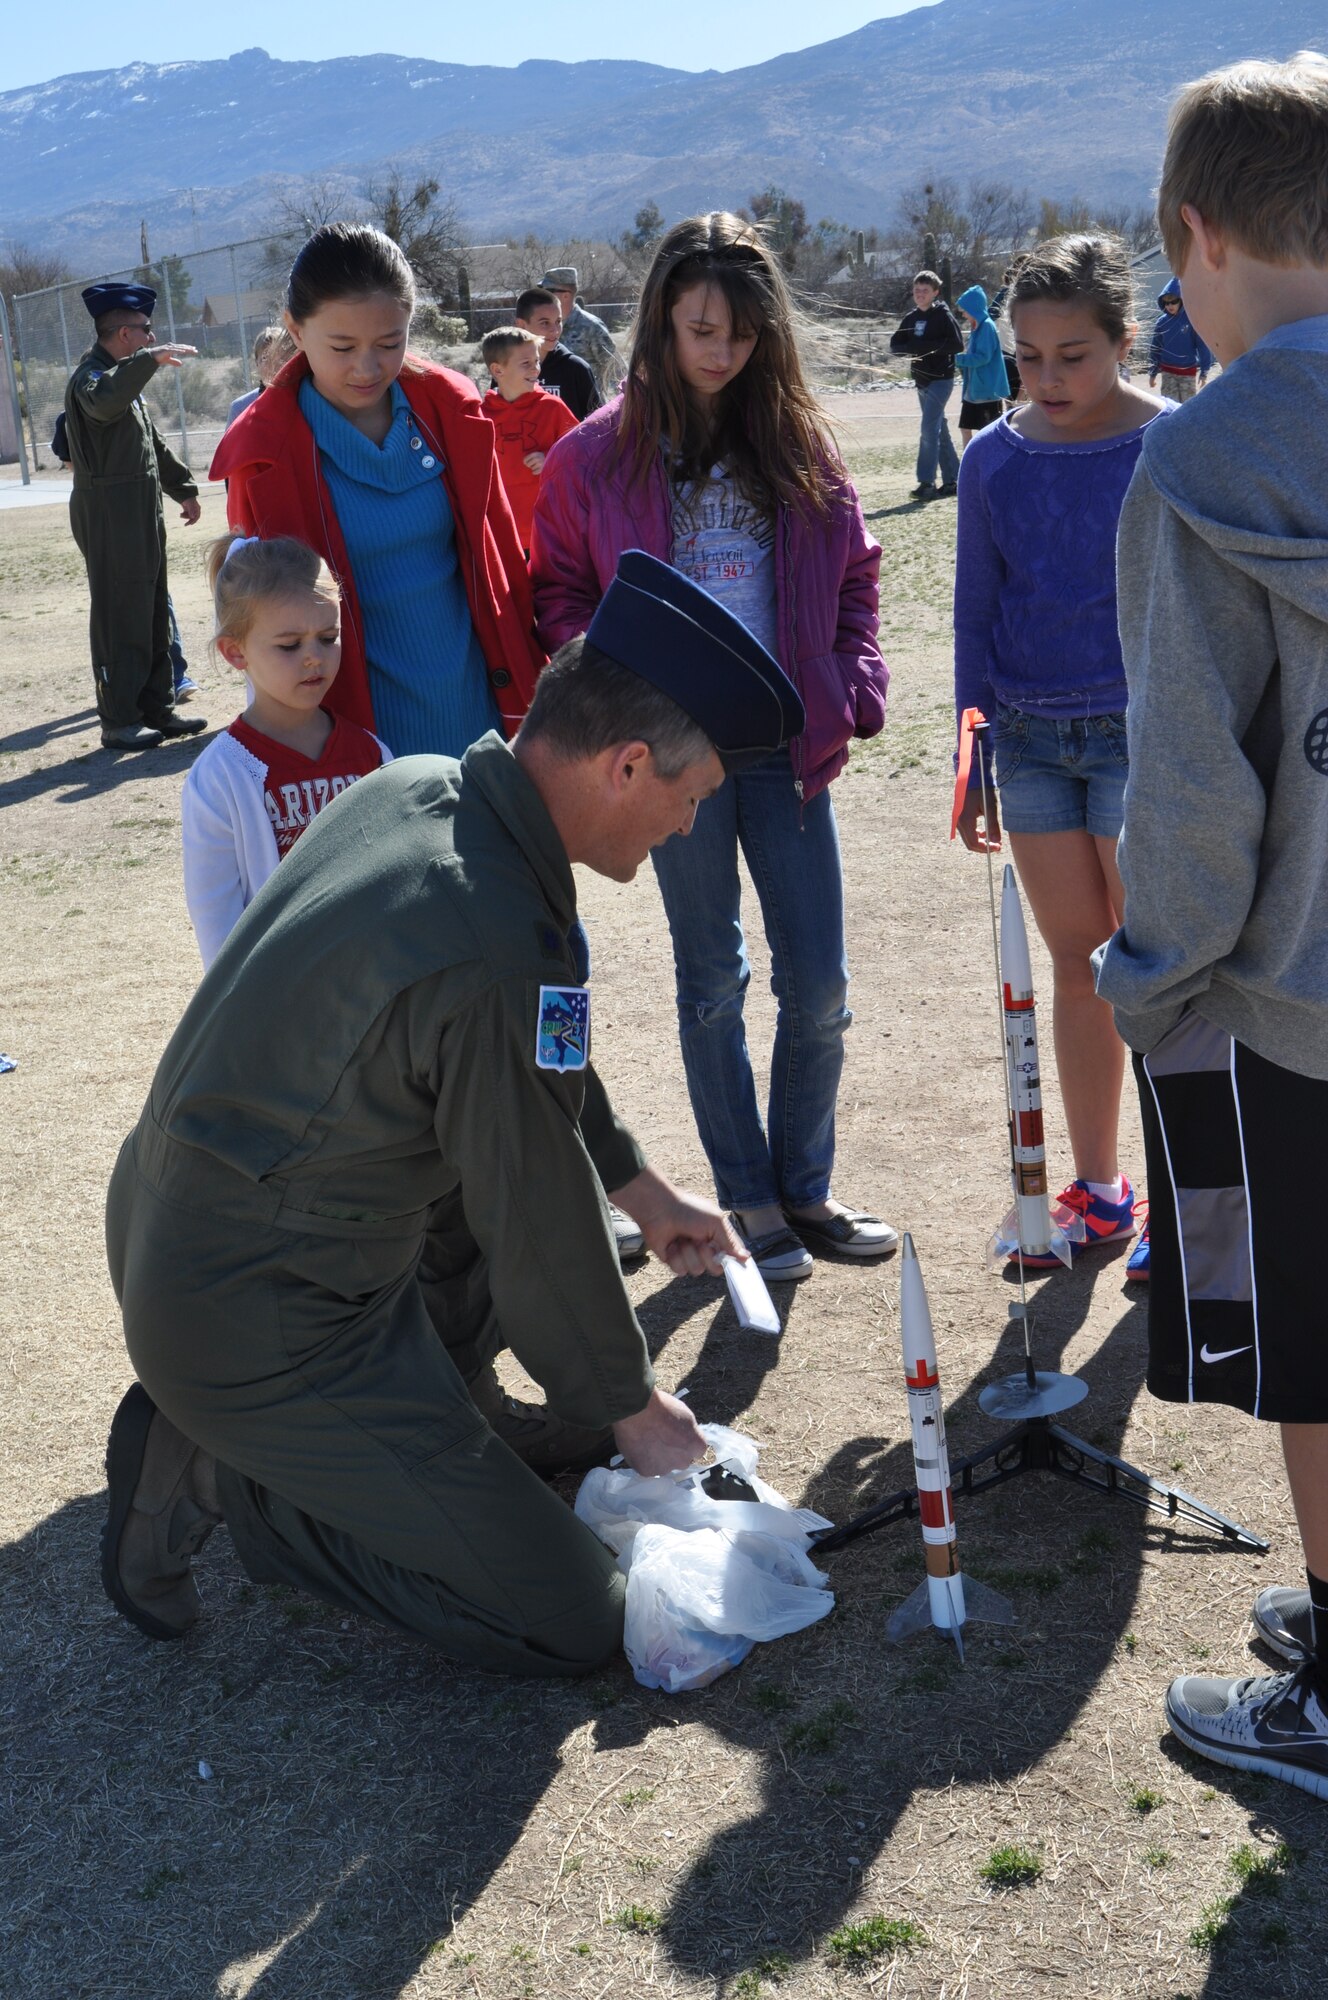 Lt. Col. Dan Jones, 612th Air and Space Operations Center Space Director, prepares to shoot-off a rocket during a demonstration at Tanque Verde Elementary School in Tucson, Ariz., March 1. Airmen from 12th Air Force (Air Forces Southern) gave 5th grade students a lesson on space operations (launch operations, weather support, launch control centers and the importance of launch observation and recovery) during their visit. (USAF photo by Master Sgt. Kelly Ogden/Released).